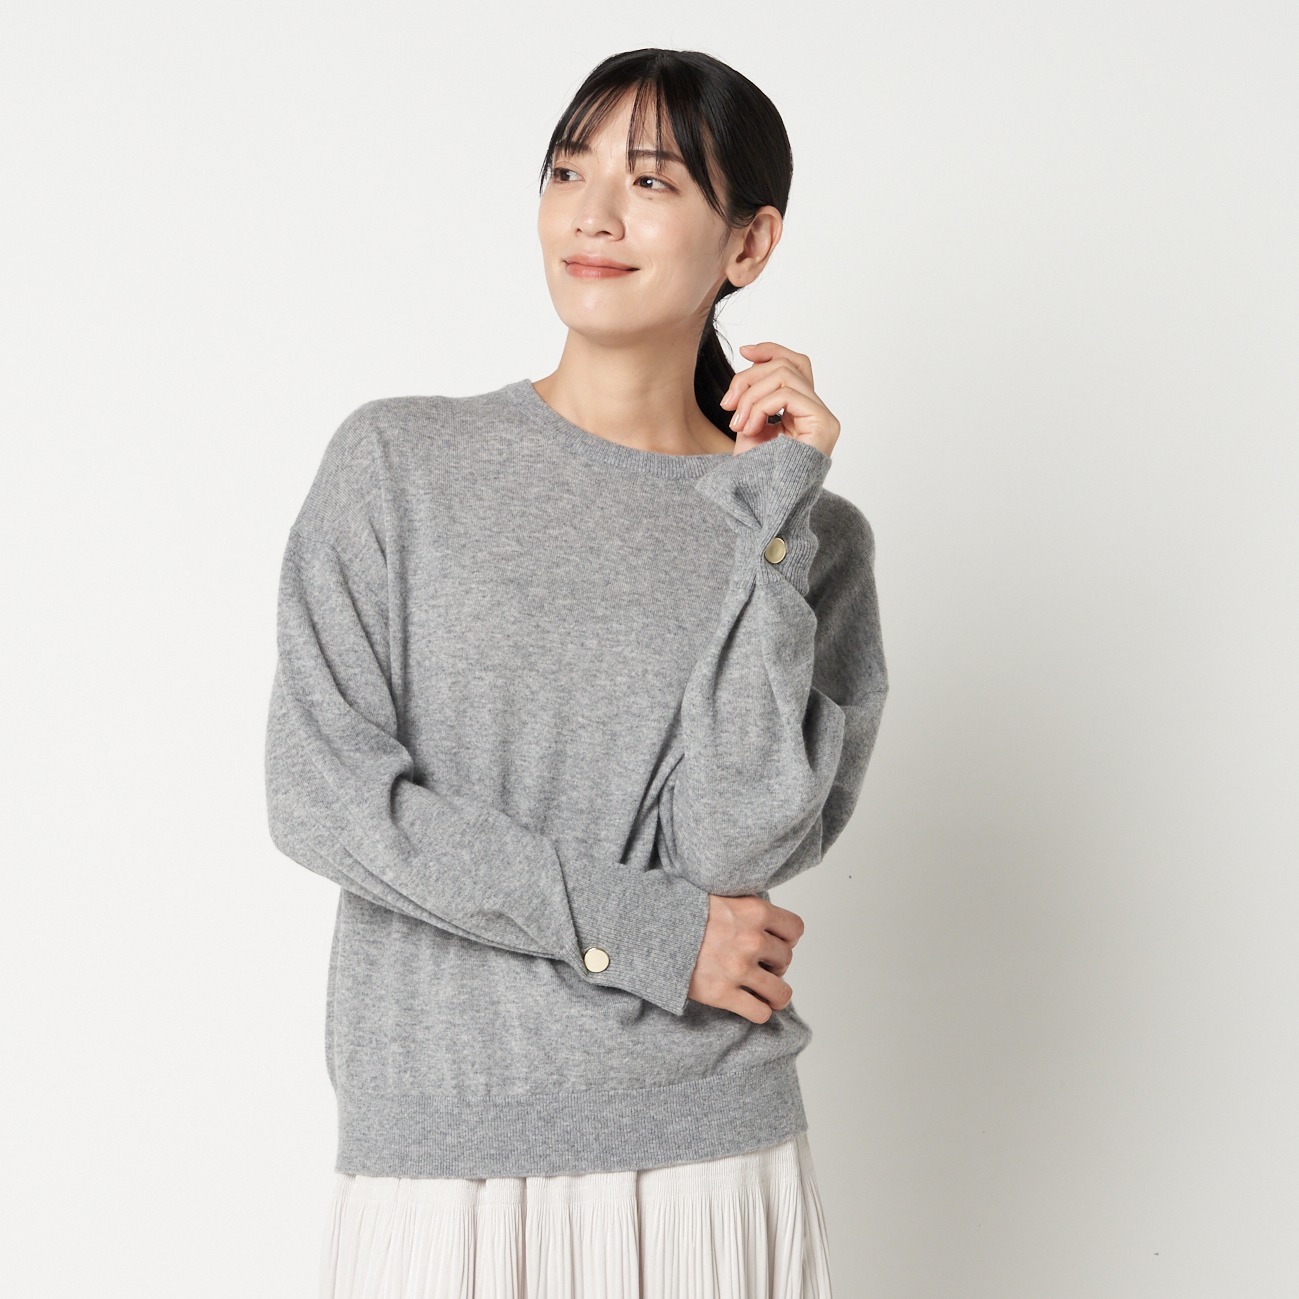 BUTTON SLEEVE KNIT 詳細画像 ミディアムグレー 9